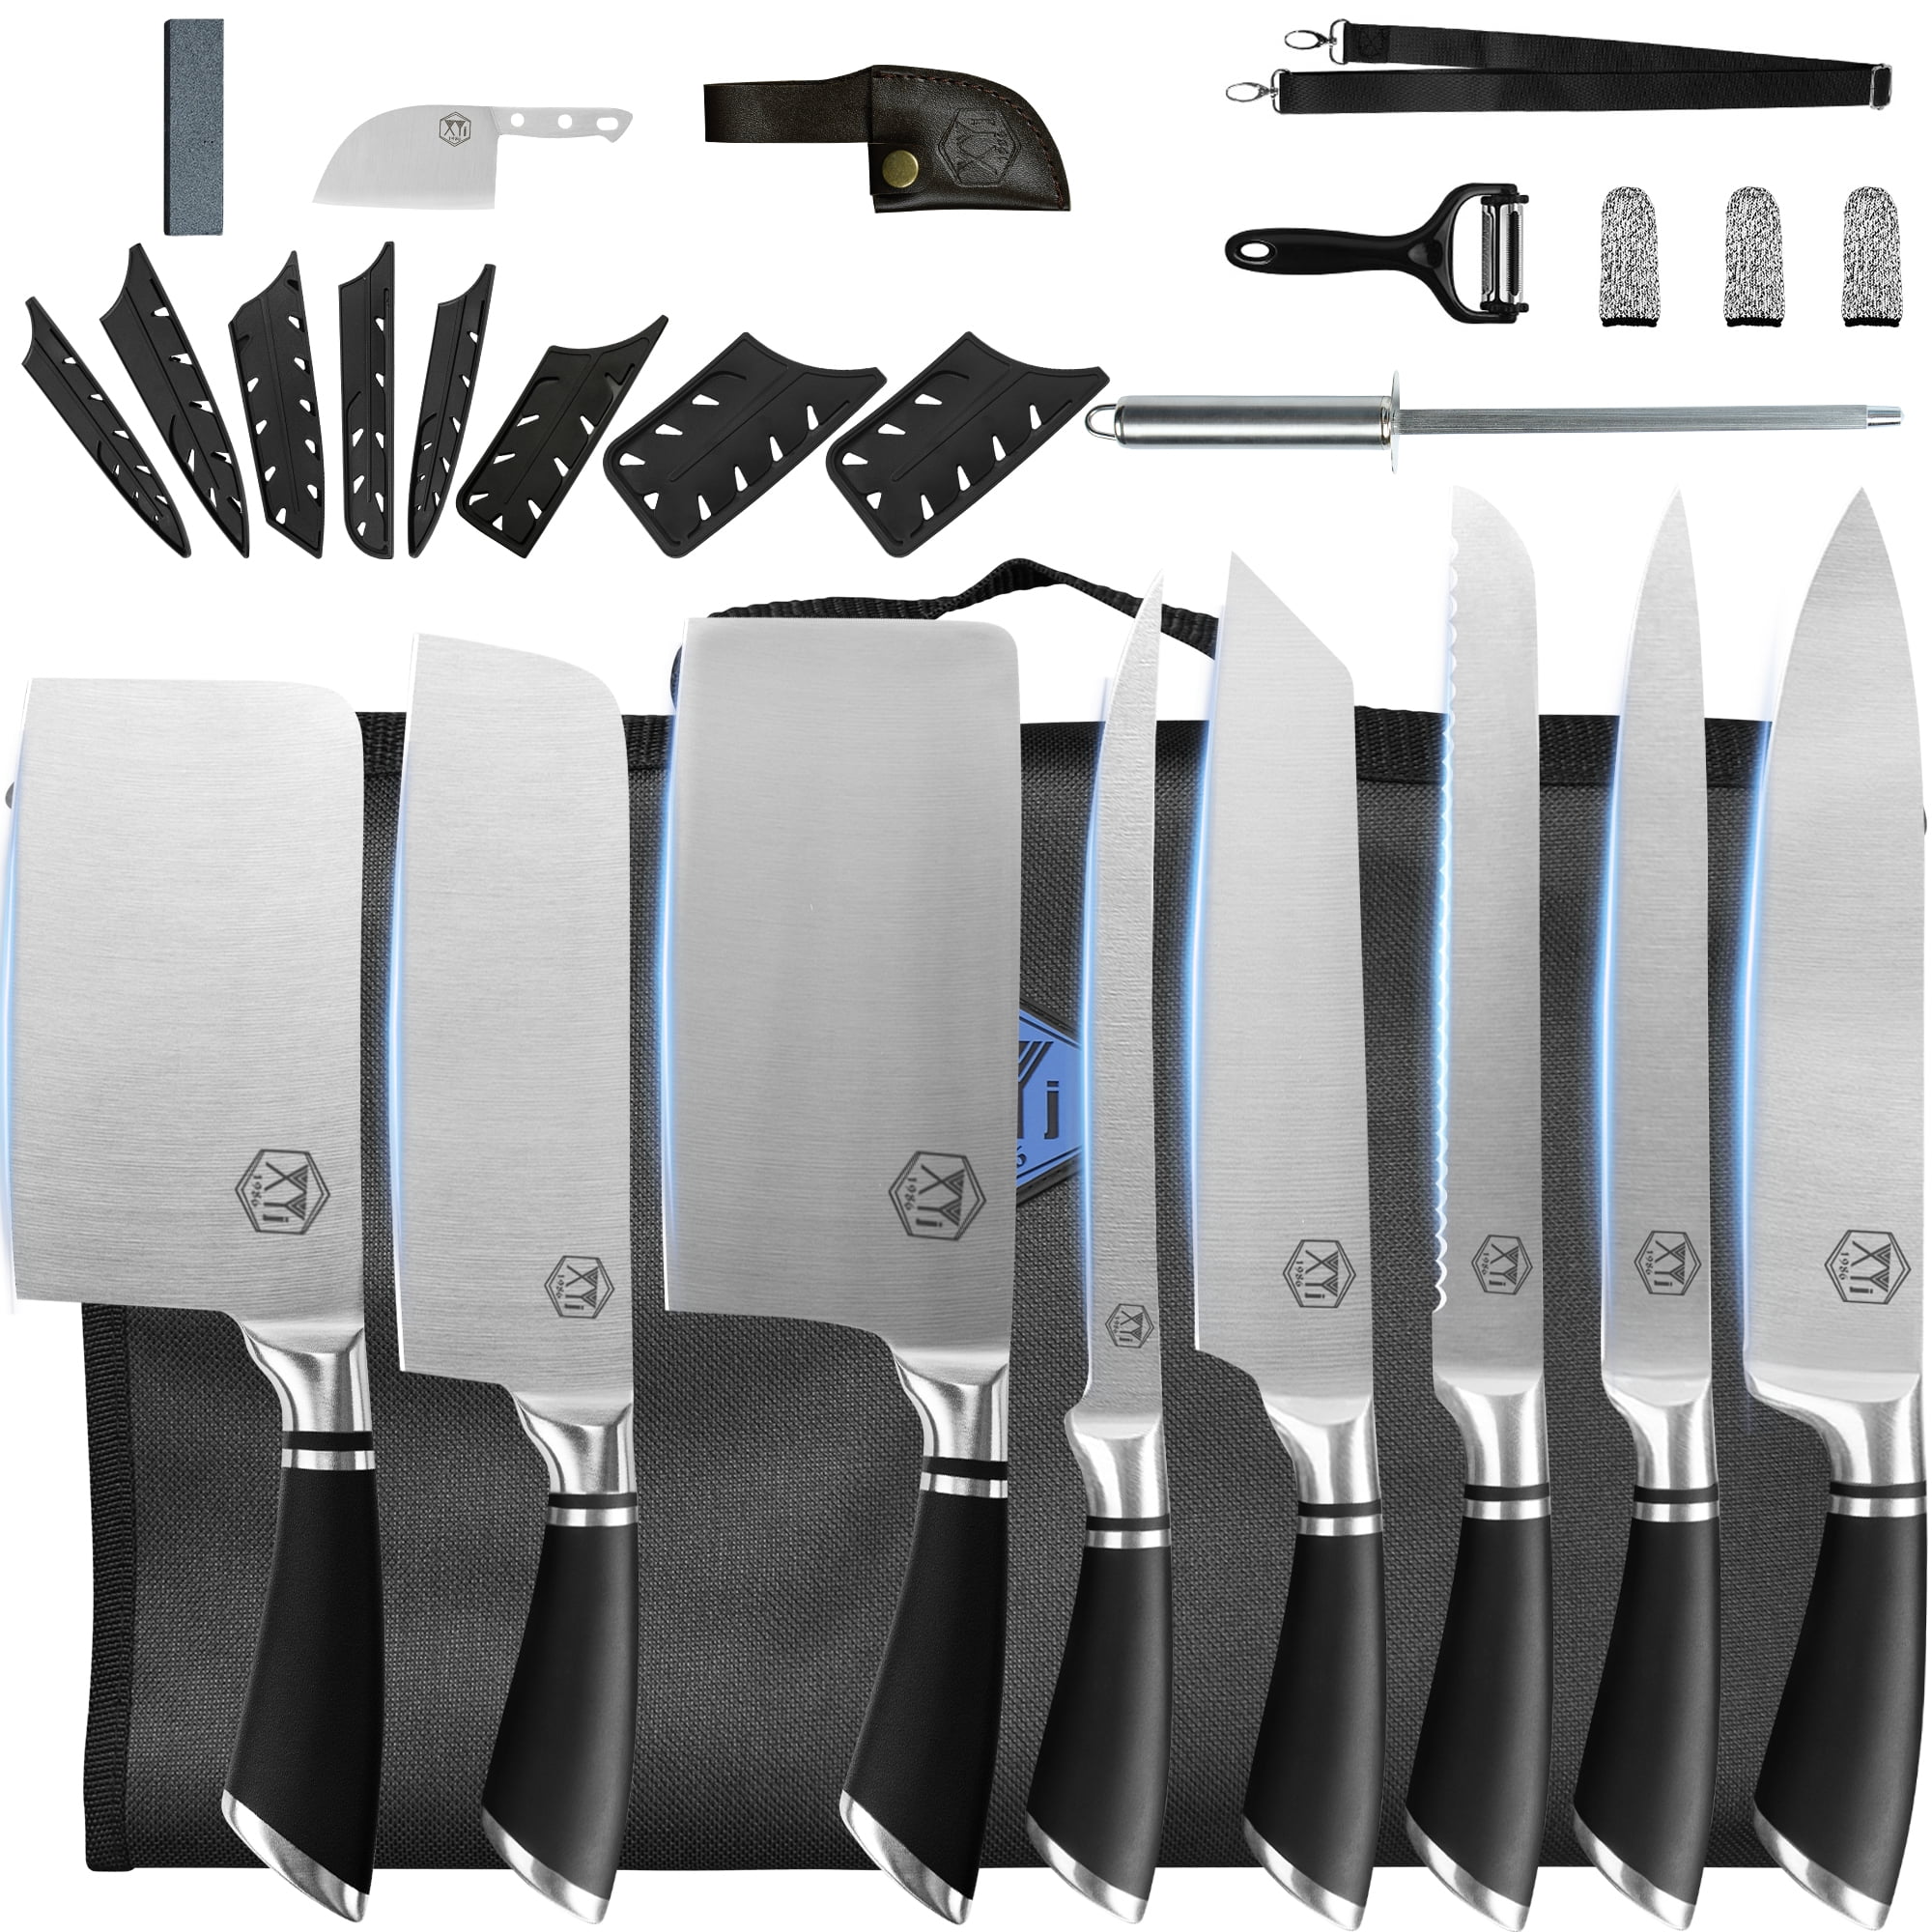 XYj Professional Chef Knife Set for Men Kitchen Kit Stainless